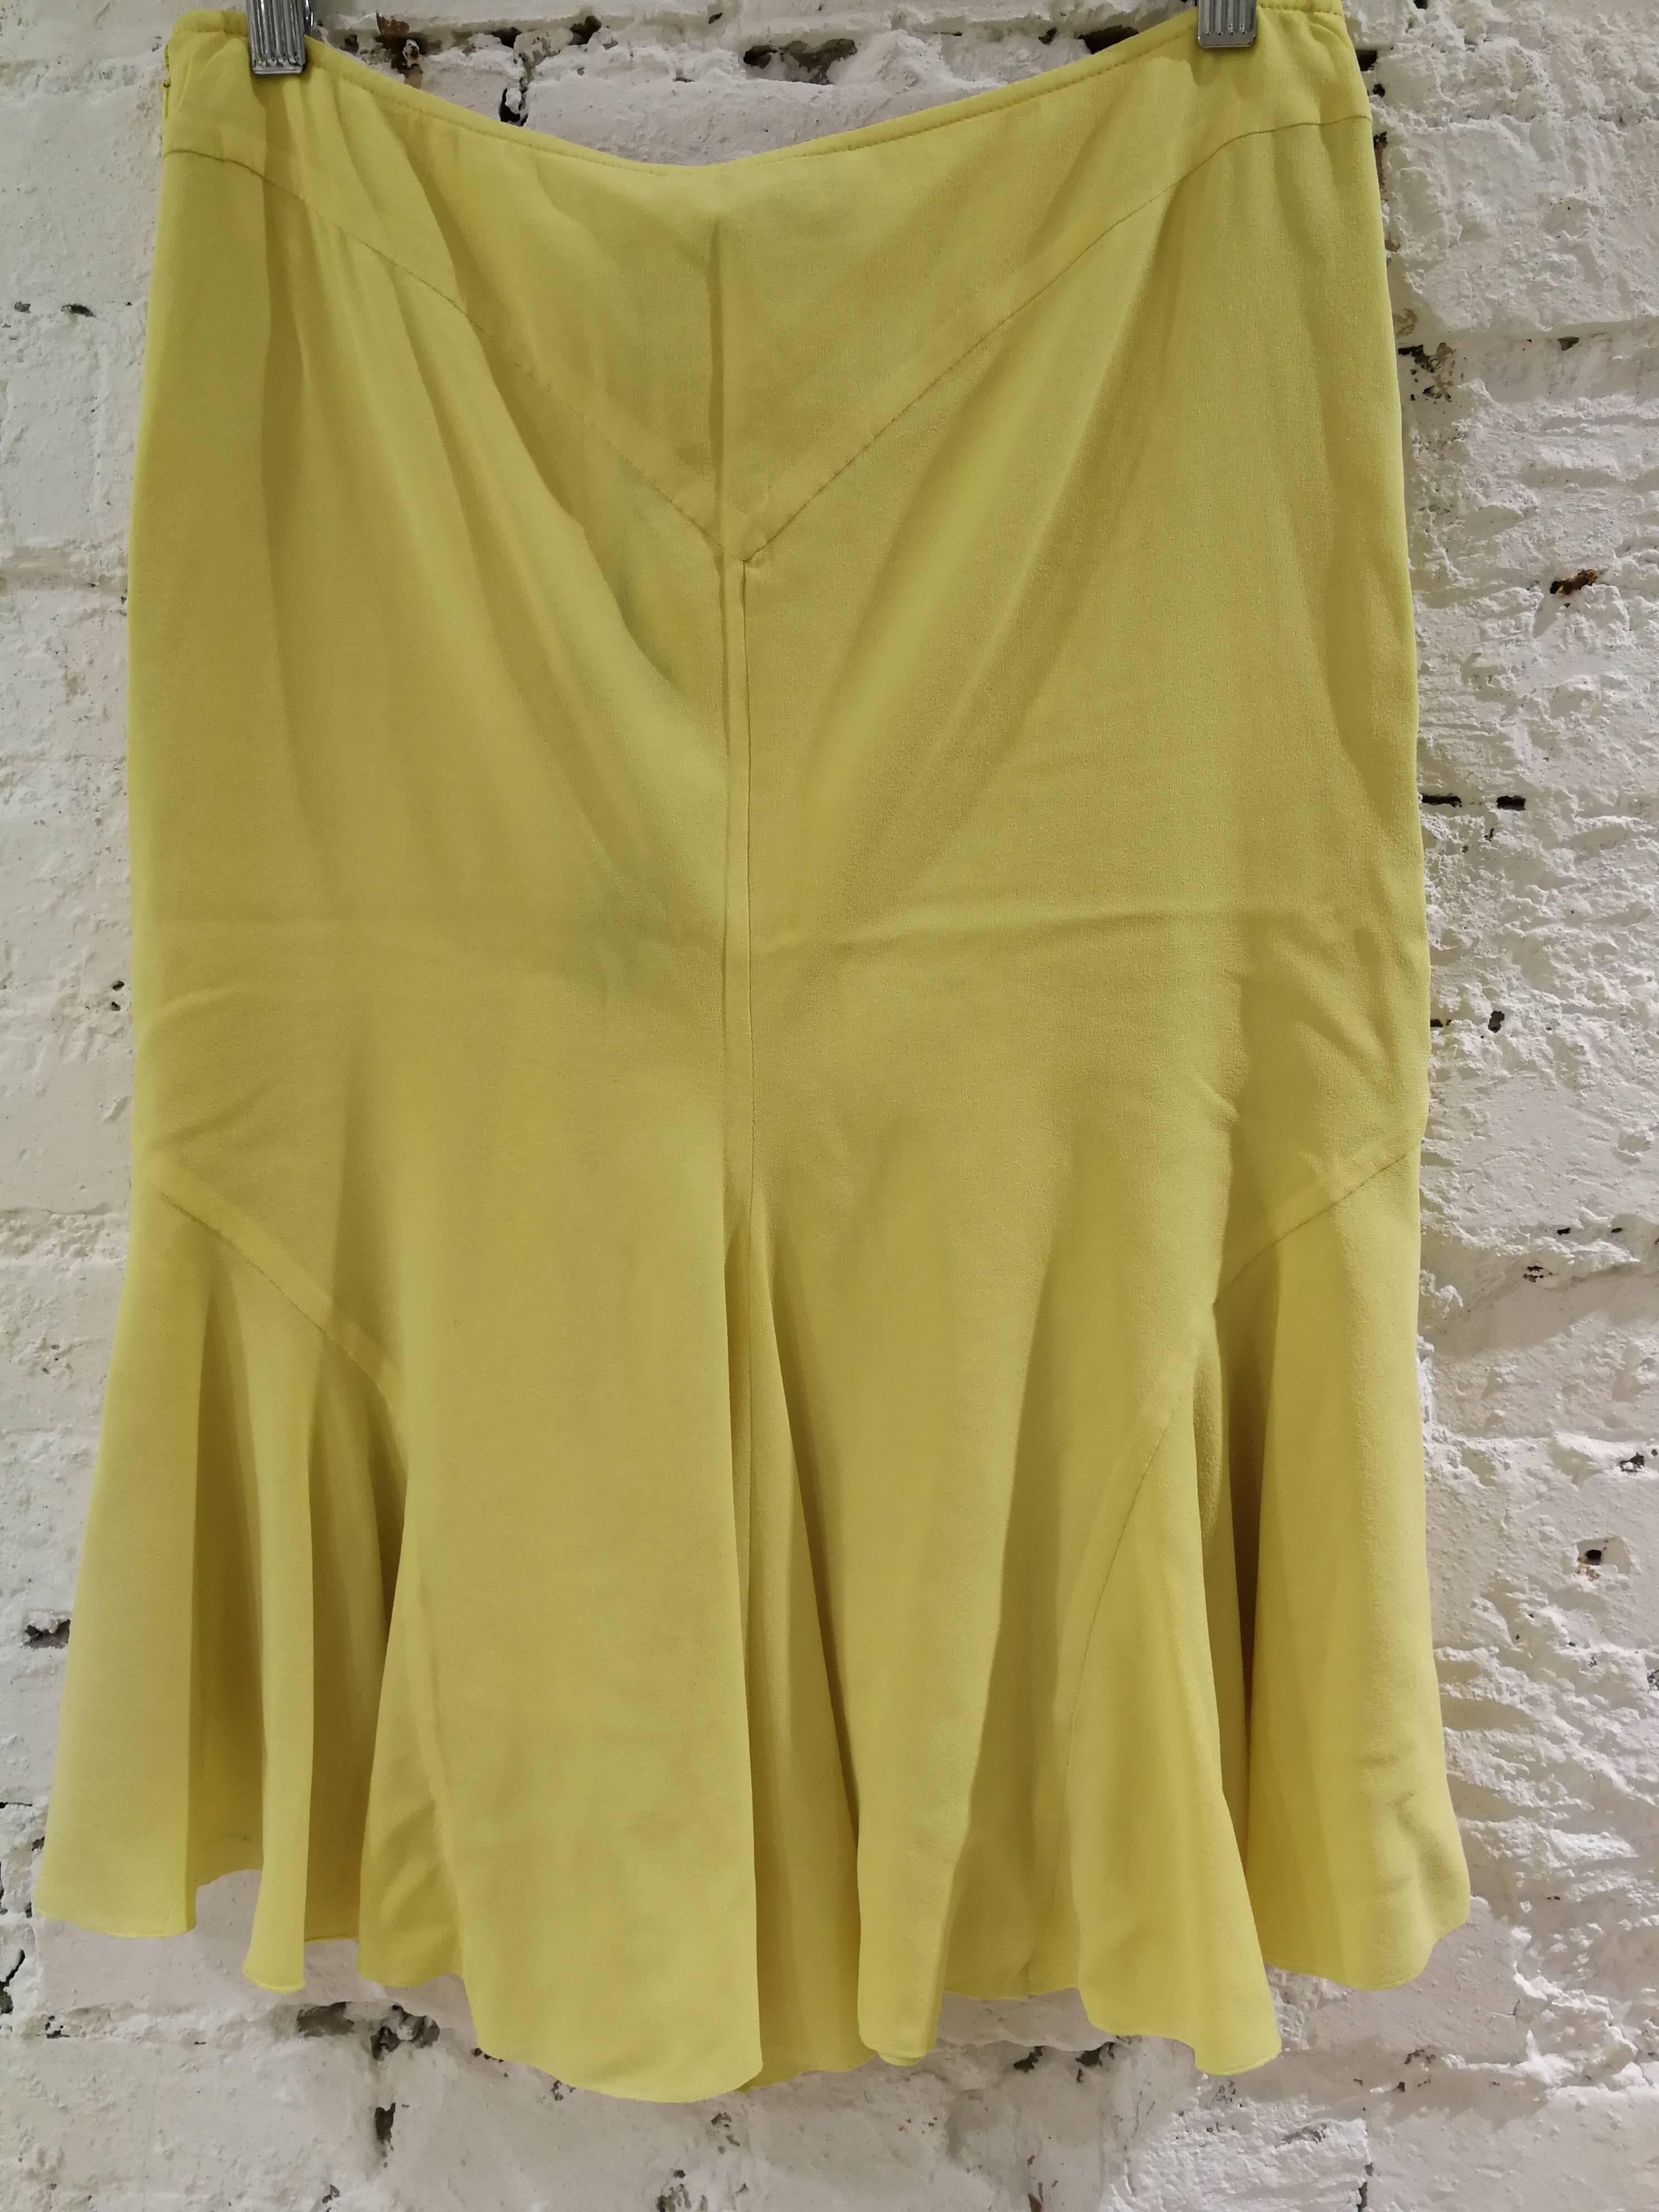 Gianni Versace Yellow Silk Skirt NWOT

Totally made in italy in size M 